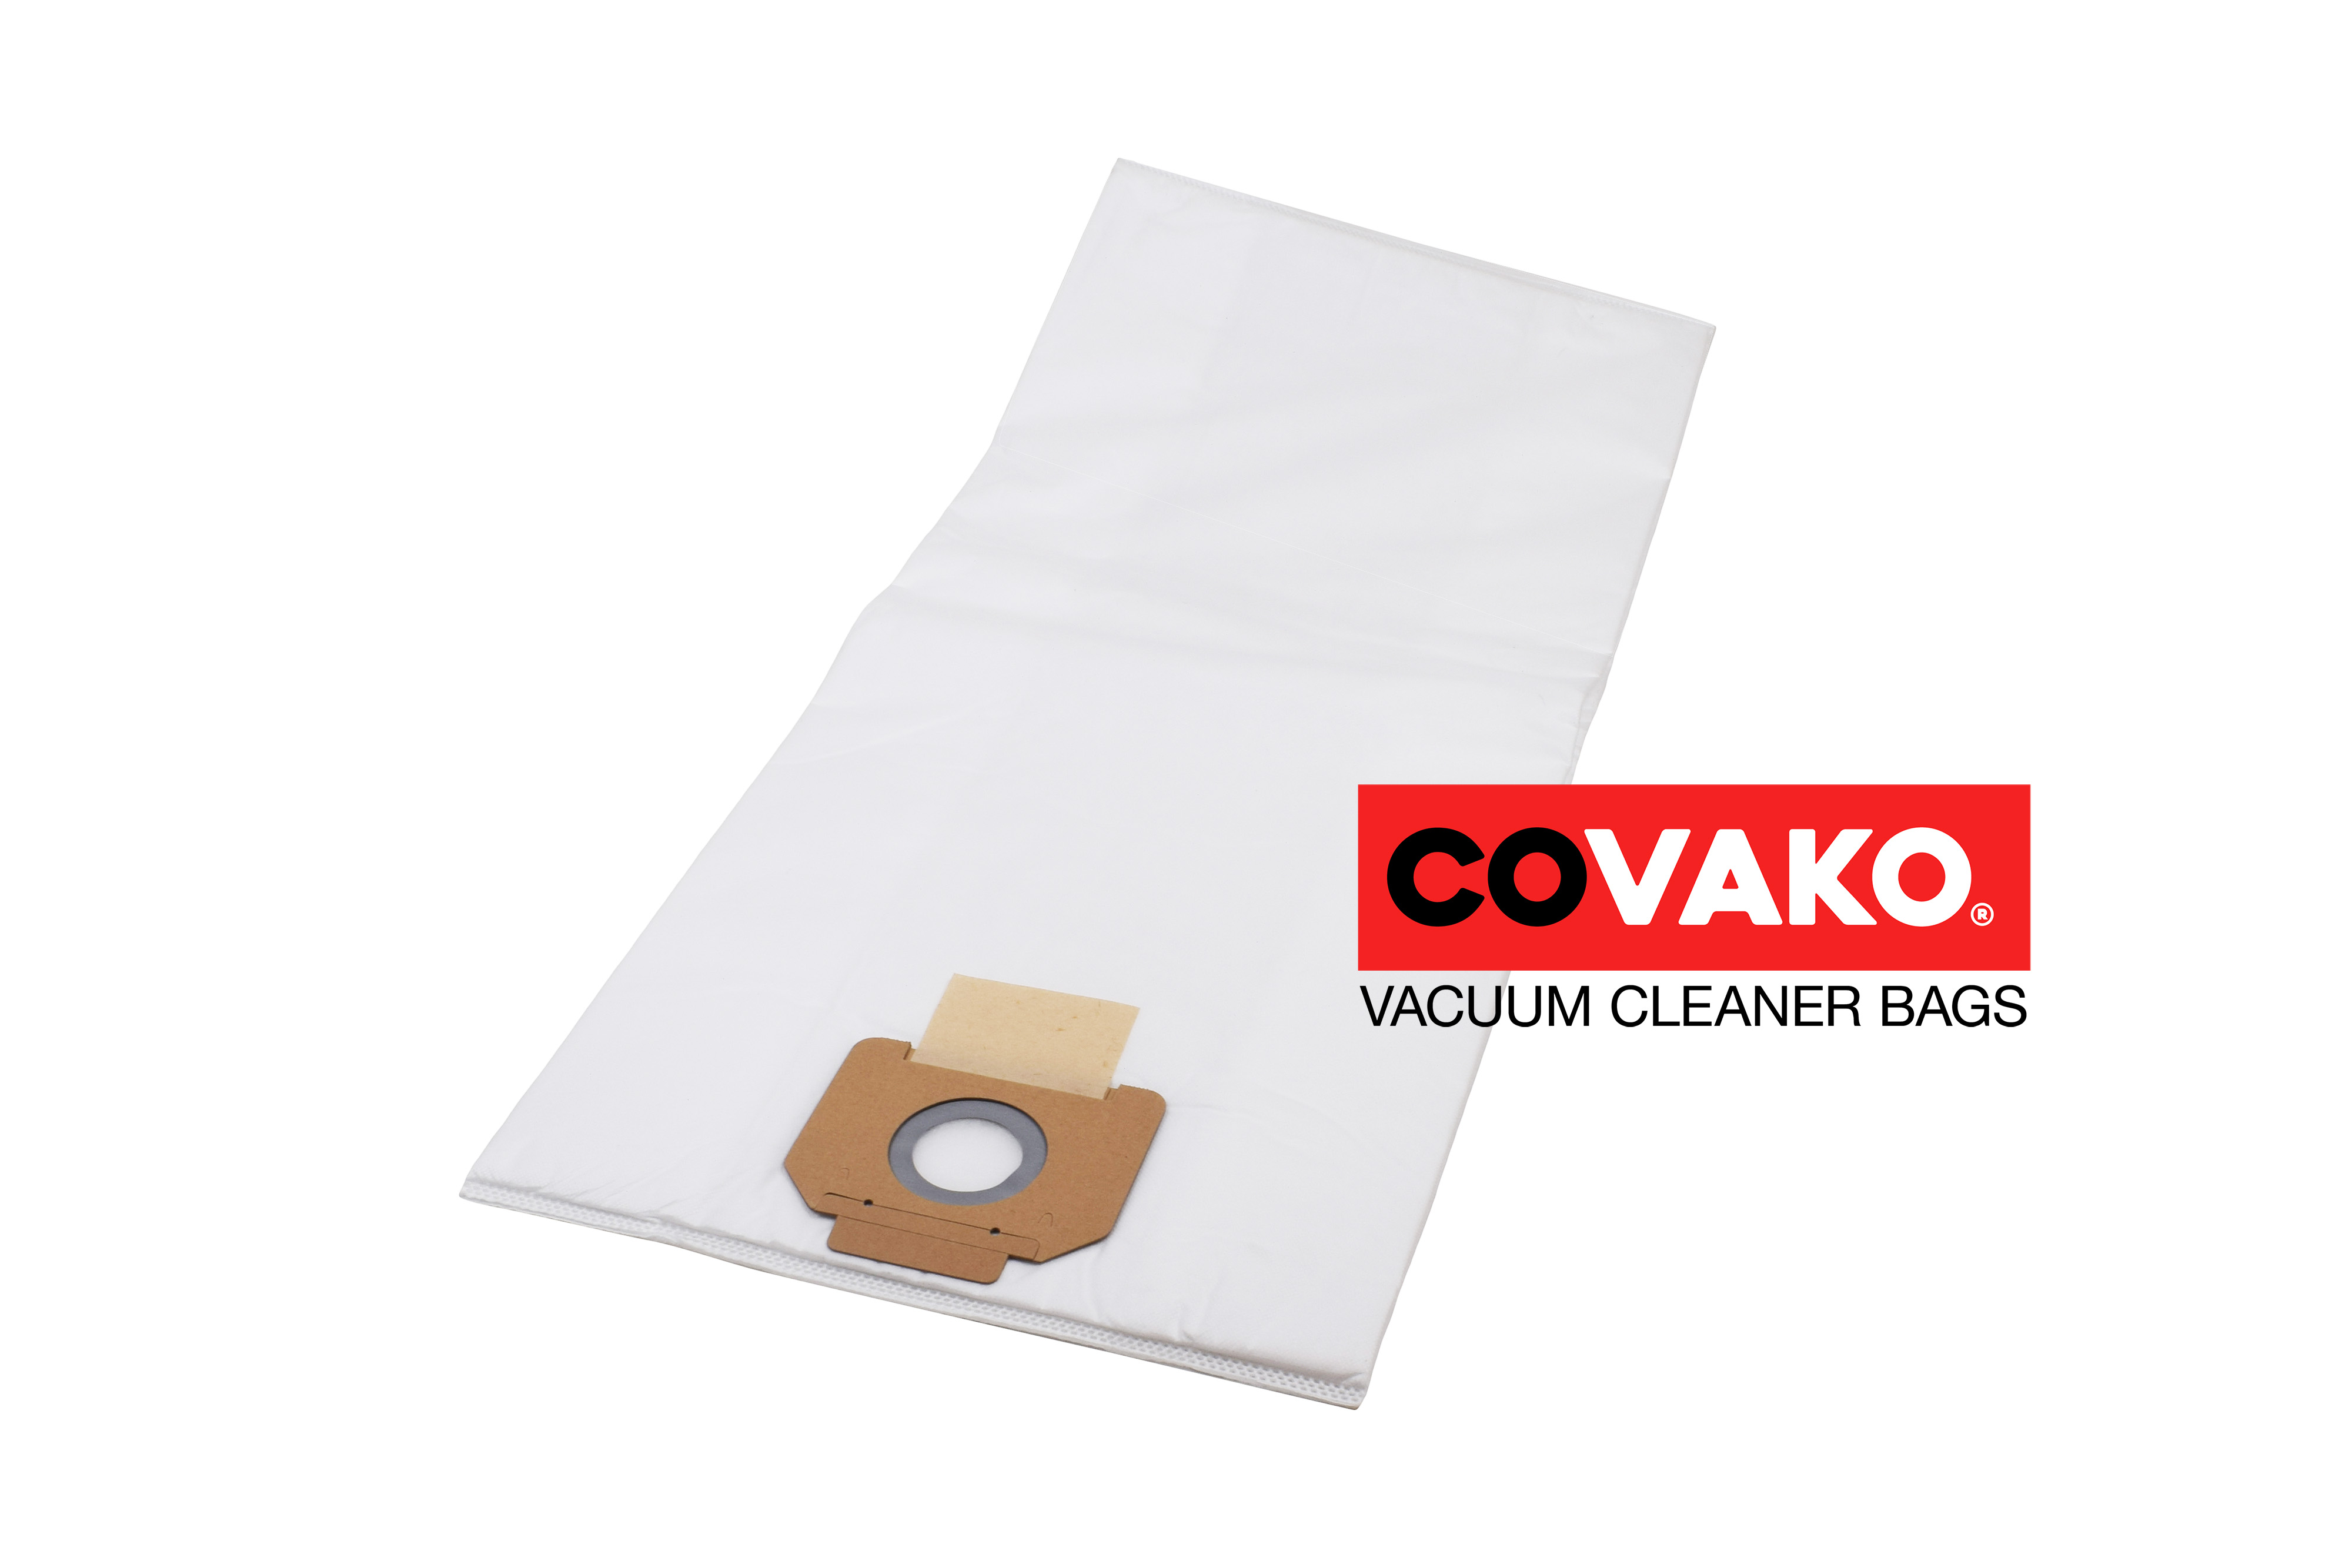 Fakir IC 444 RT / Synthesis - Fakir vacuum cleaner bags